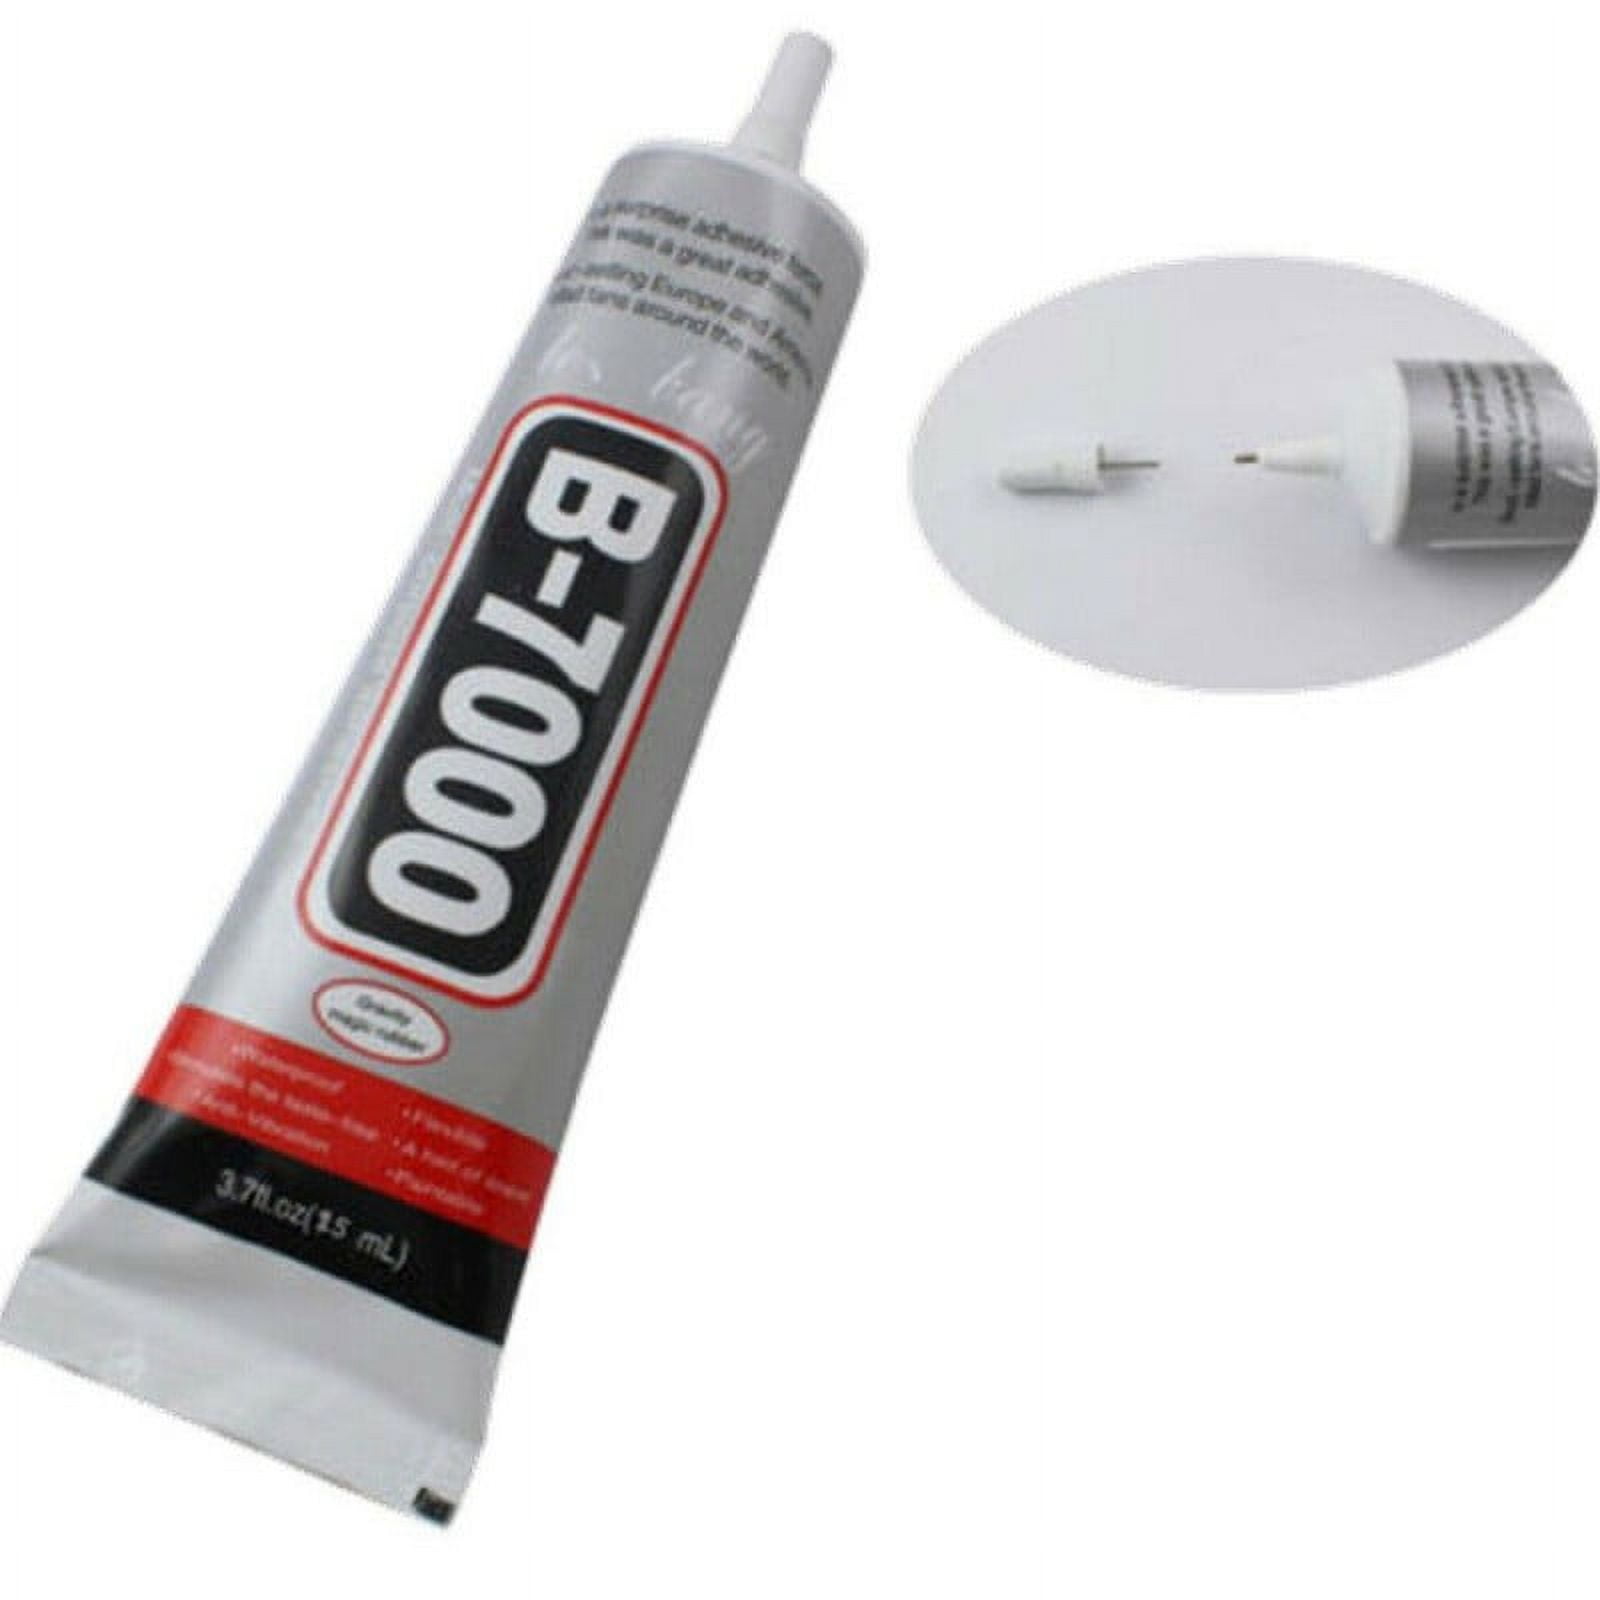 B-7000 50ml Glue with Precision Tips Adhesive Glue for Craft DIY Jewelry  Phone Screen Repair RC Tires Paste 2 Pack